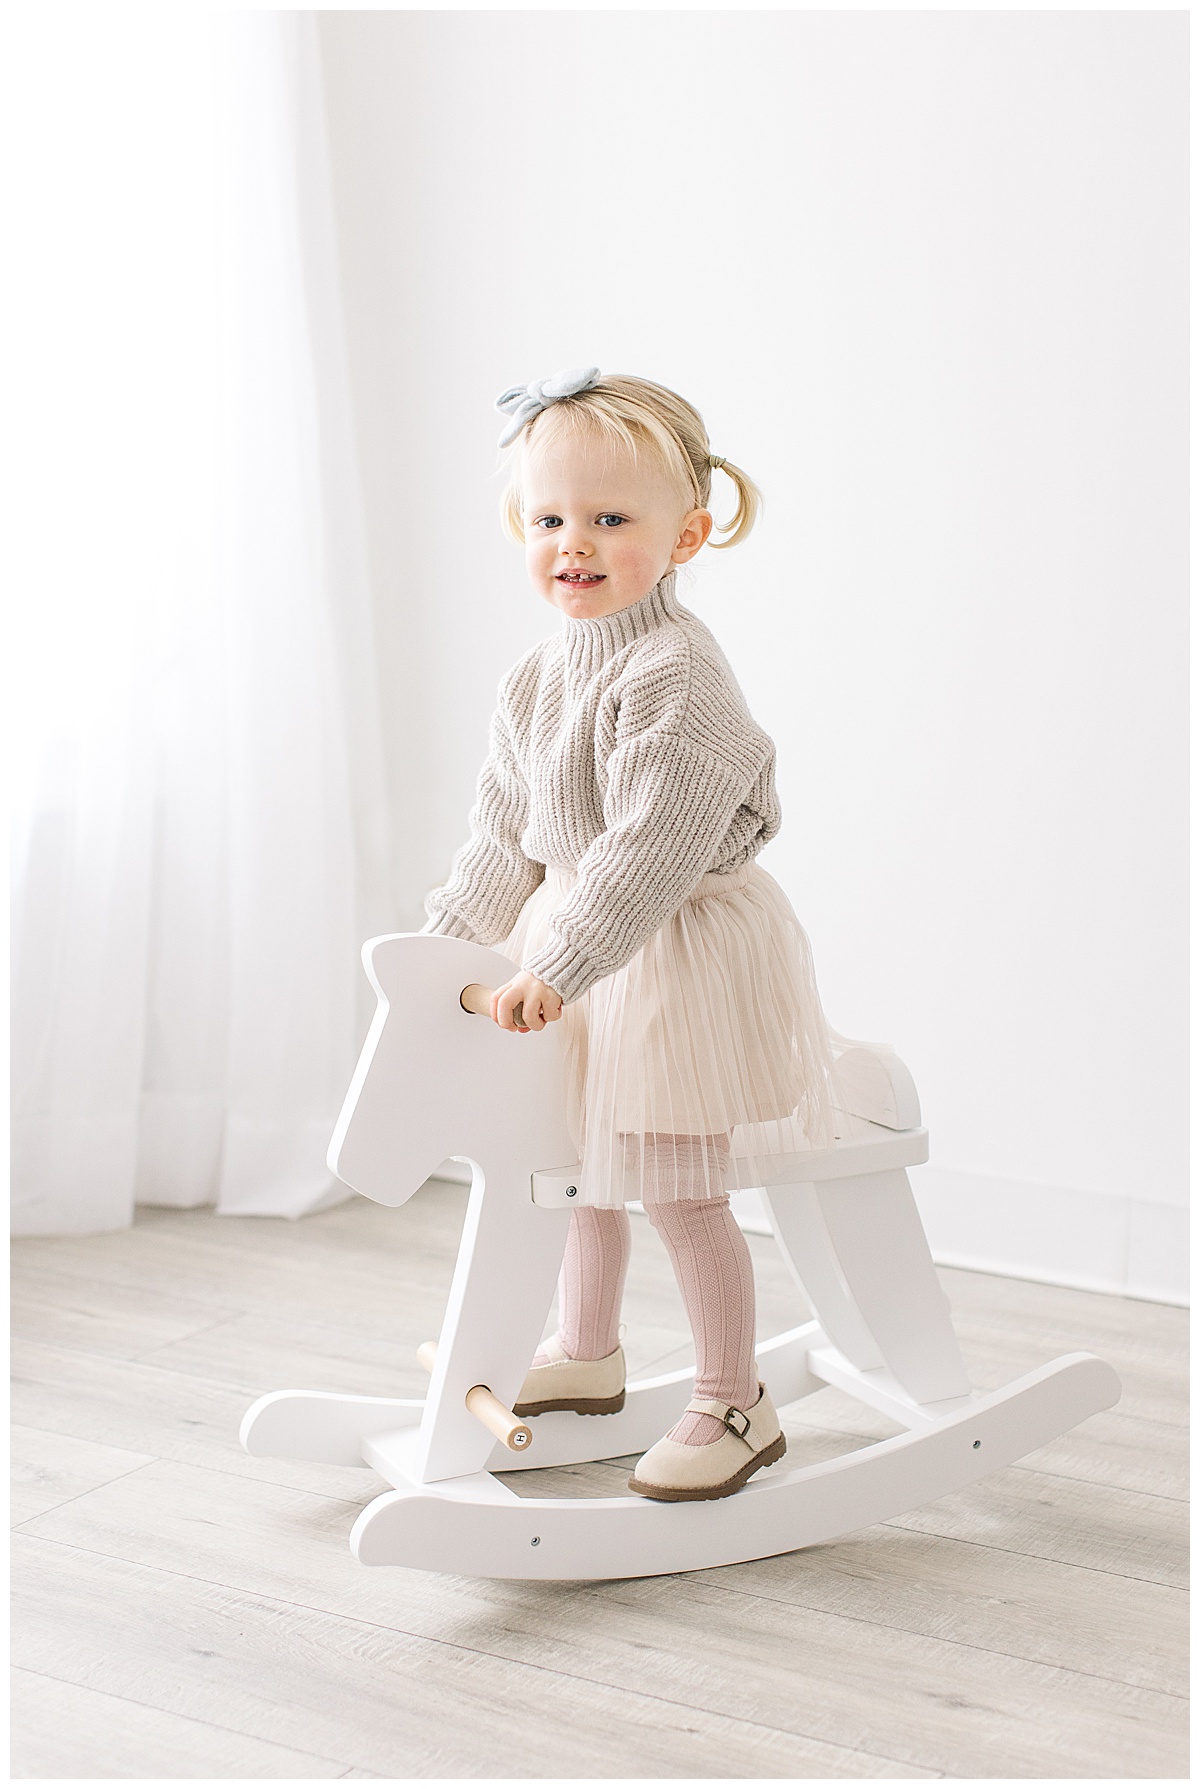 little girl looking at camera rocking horse pictures studio